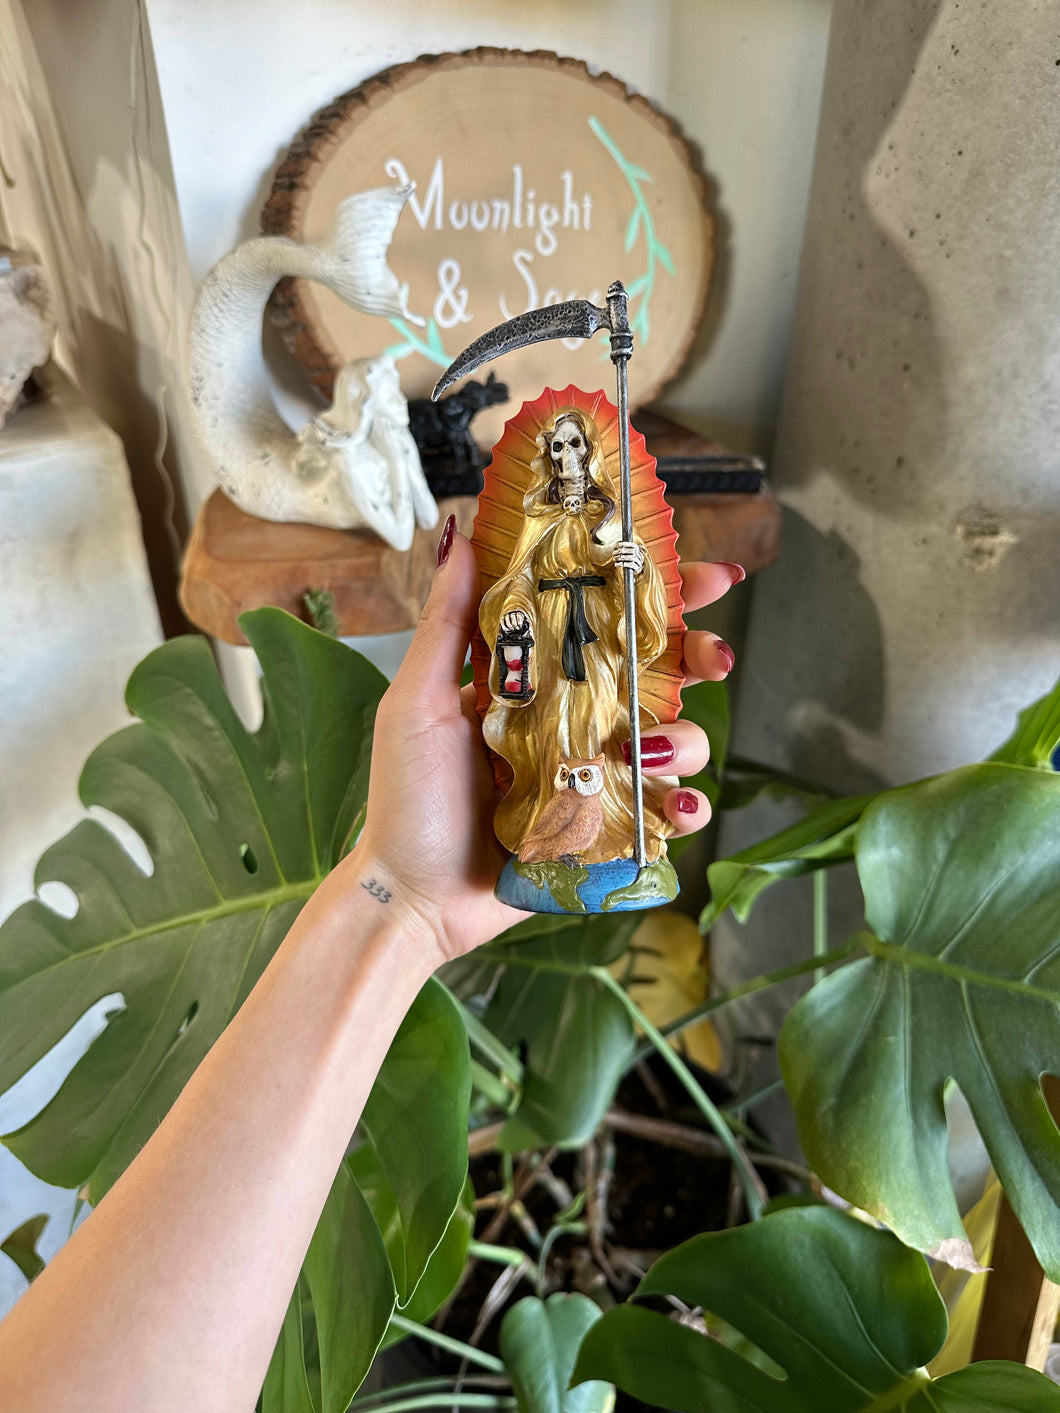 Santa Muerte Statue Figure (Our Lady of Holy Death) - Gold Robes